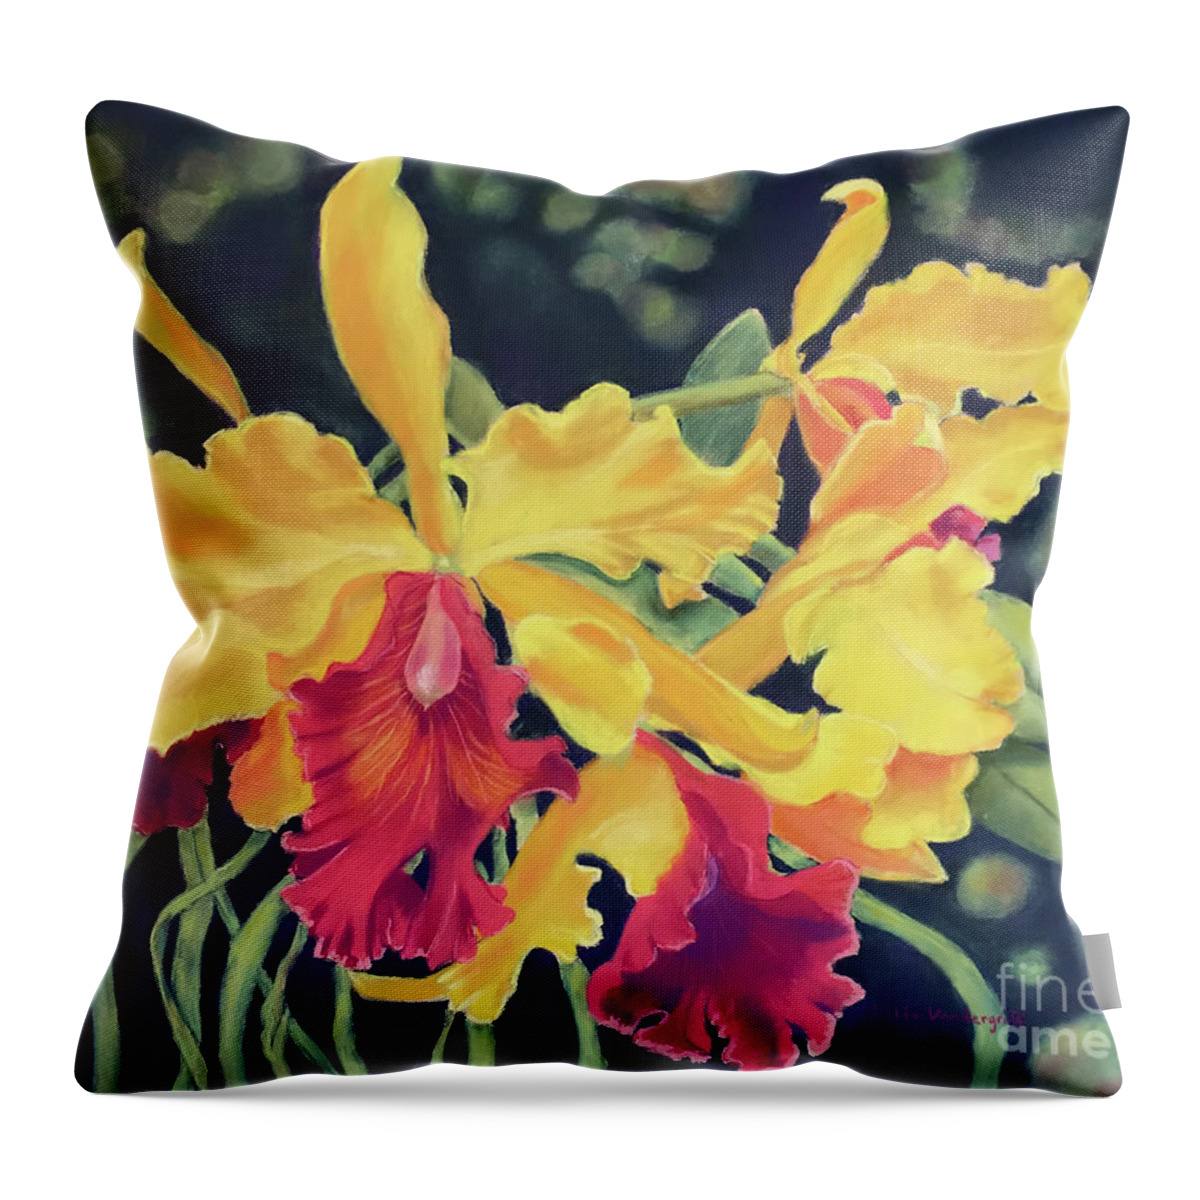 Orchid Throw Pillow featuring the painting Yellow Orchids by Hilda Vandergriff